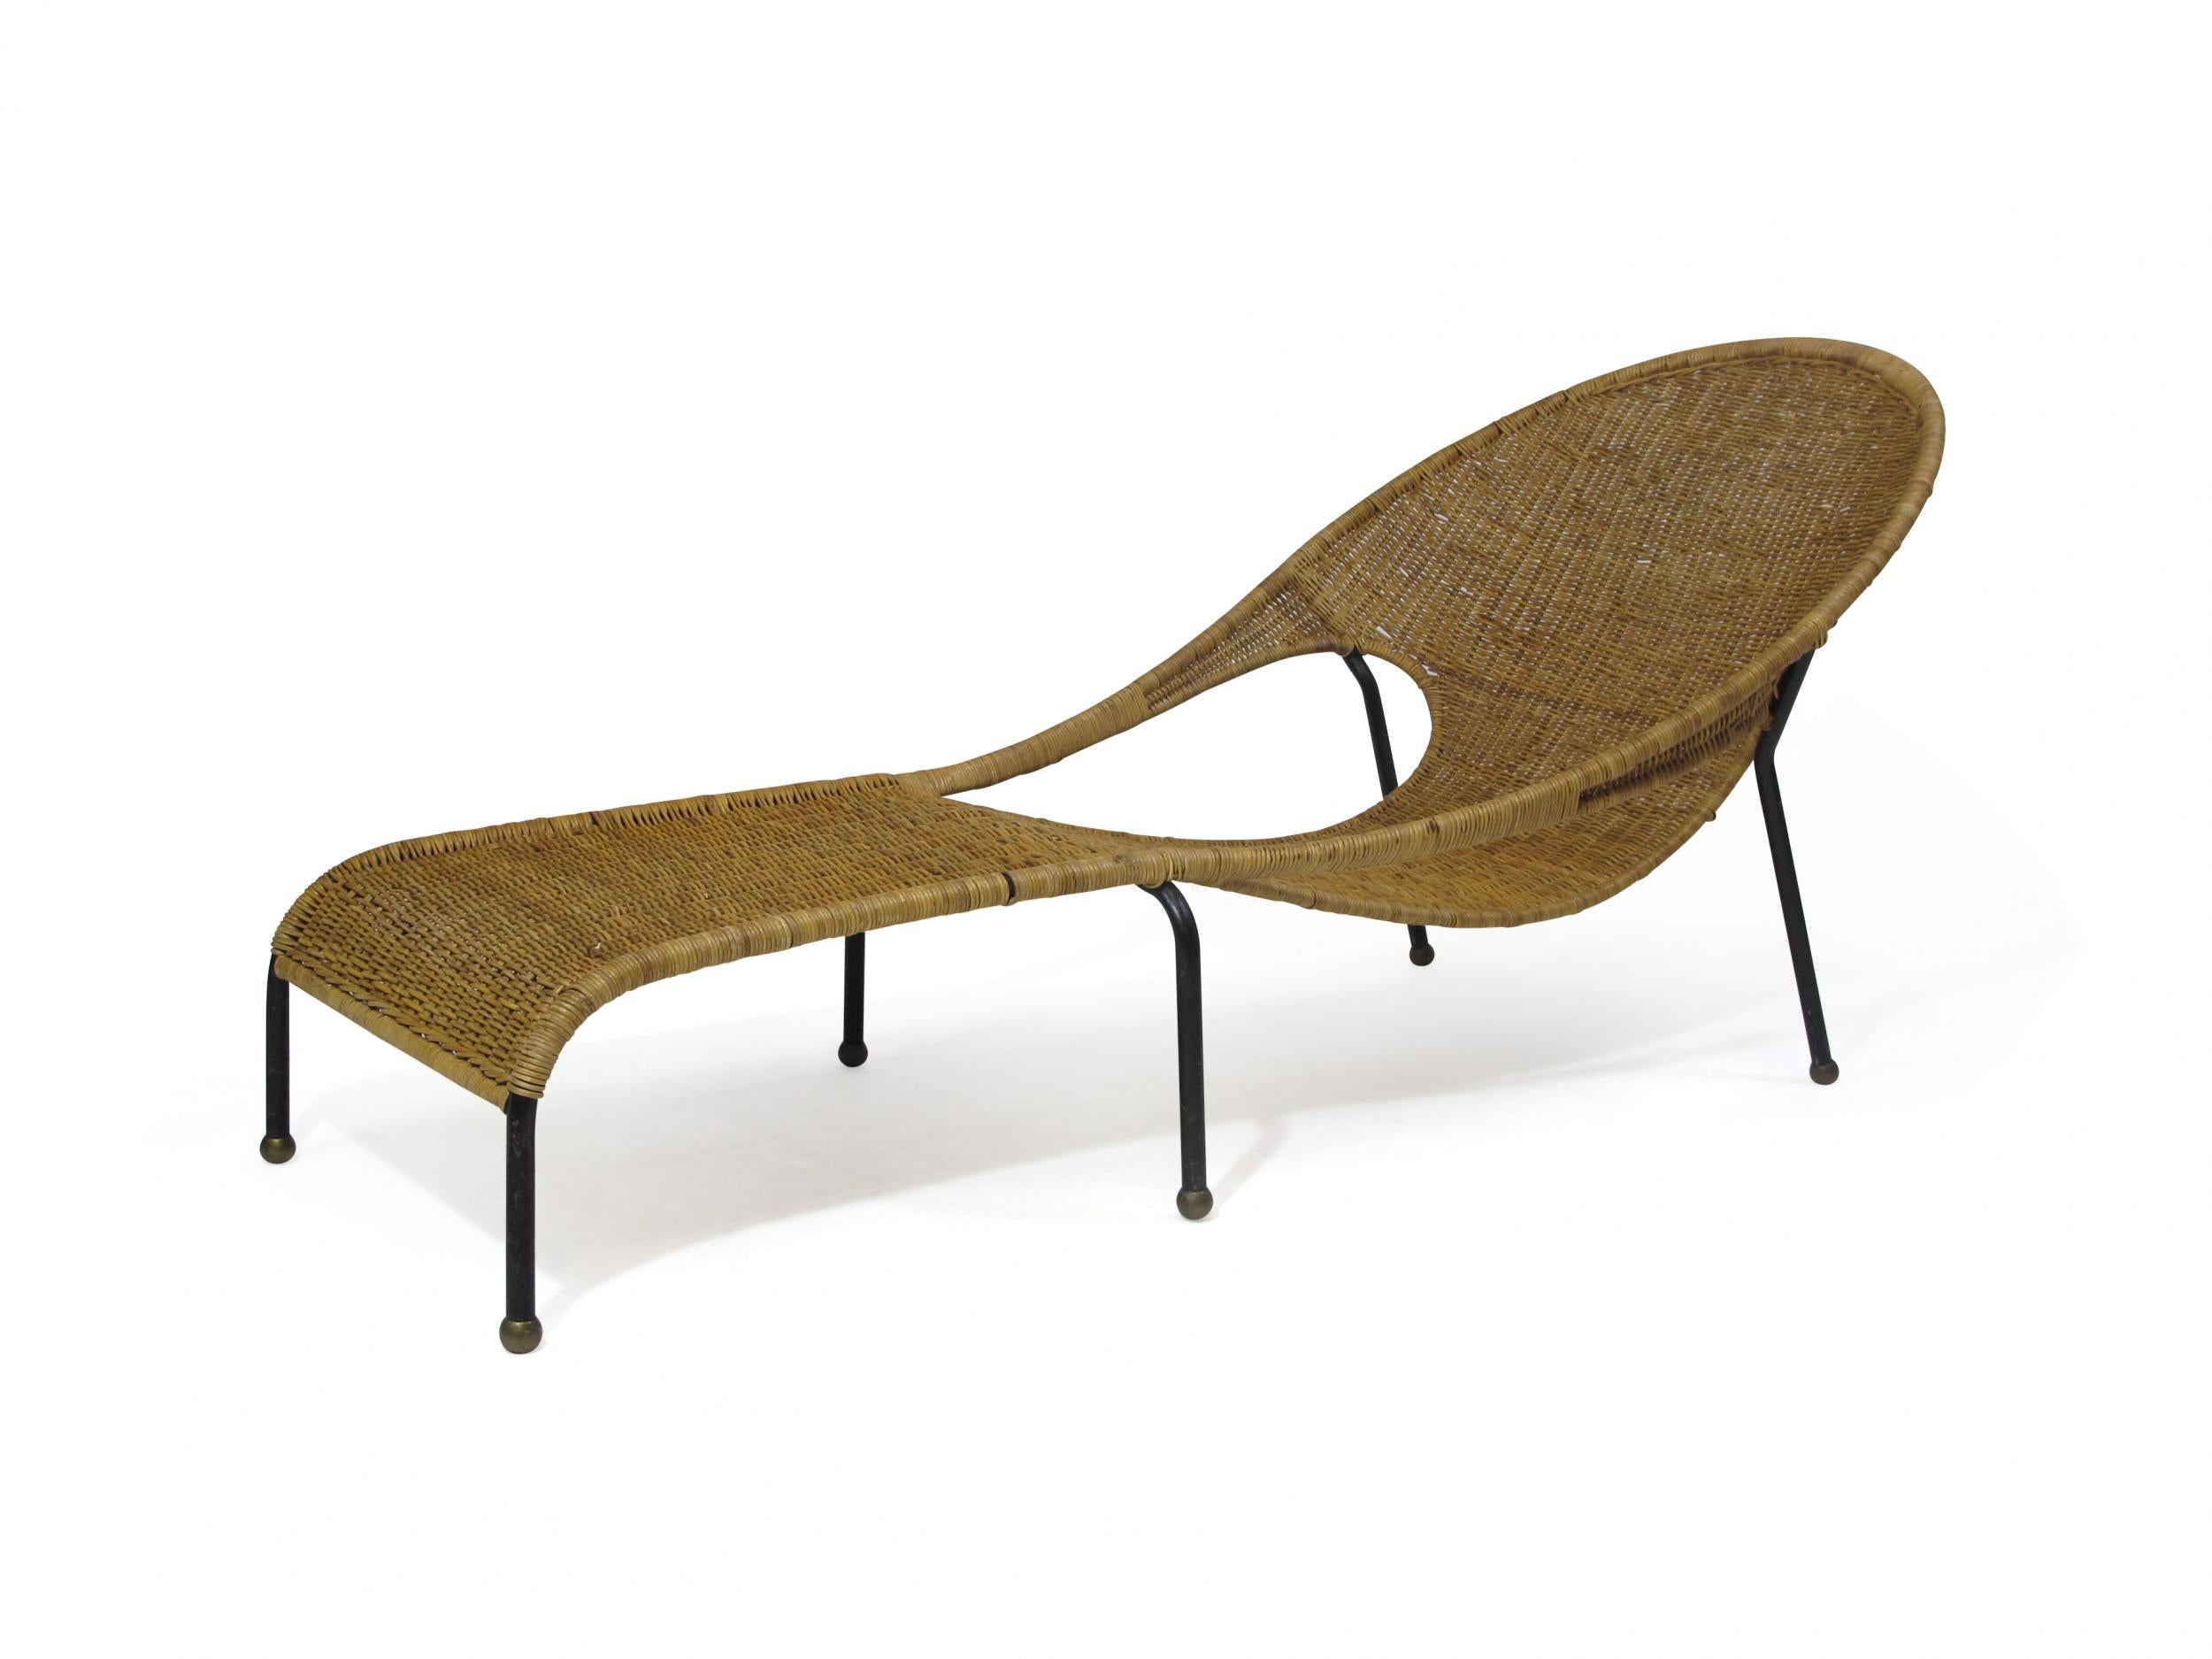 Unknown Midcentury Woven Wicker Chaise Lounge